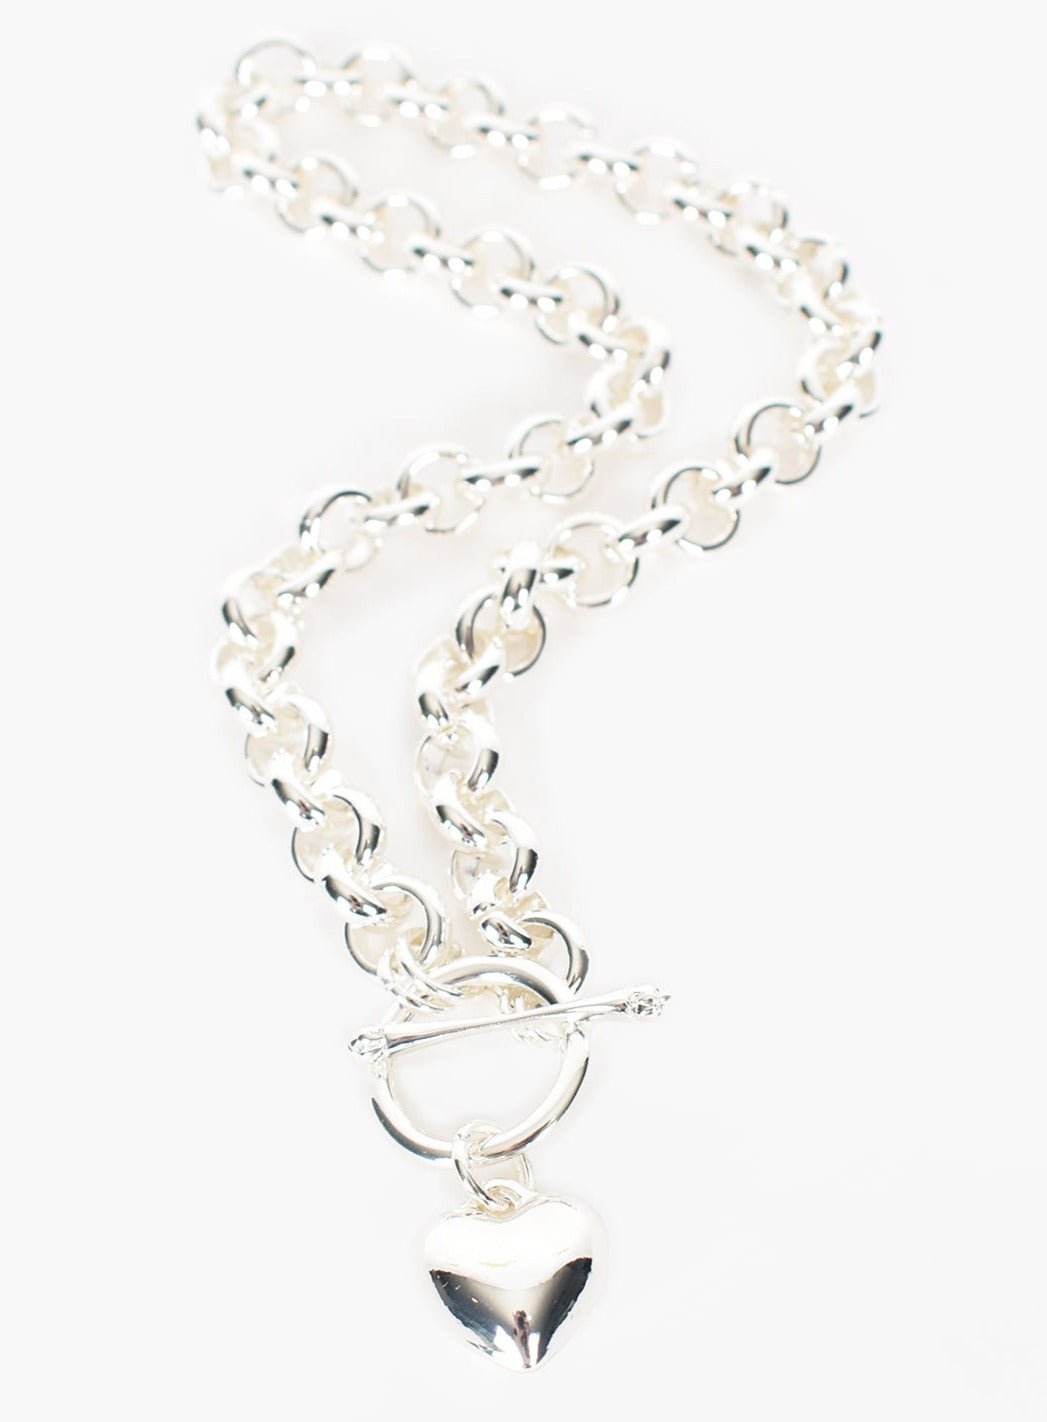 Chloe Silver Chunky Chain Link Necklace with Heart Charm - Lacey Lou Sparkles